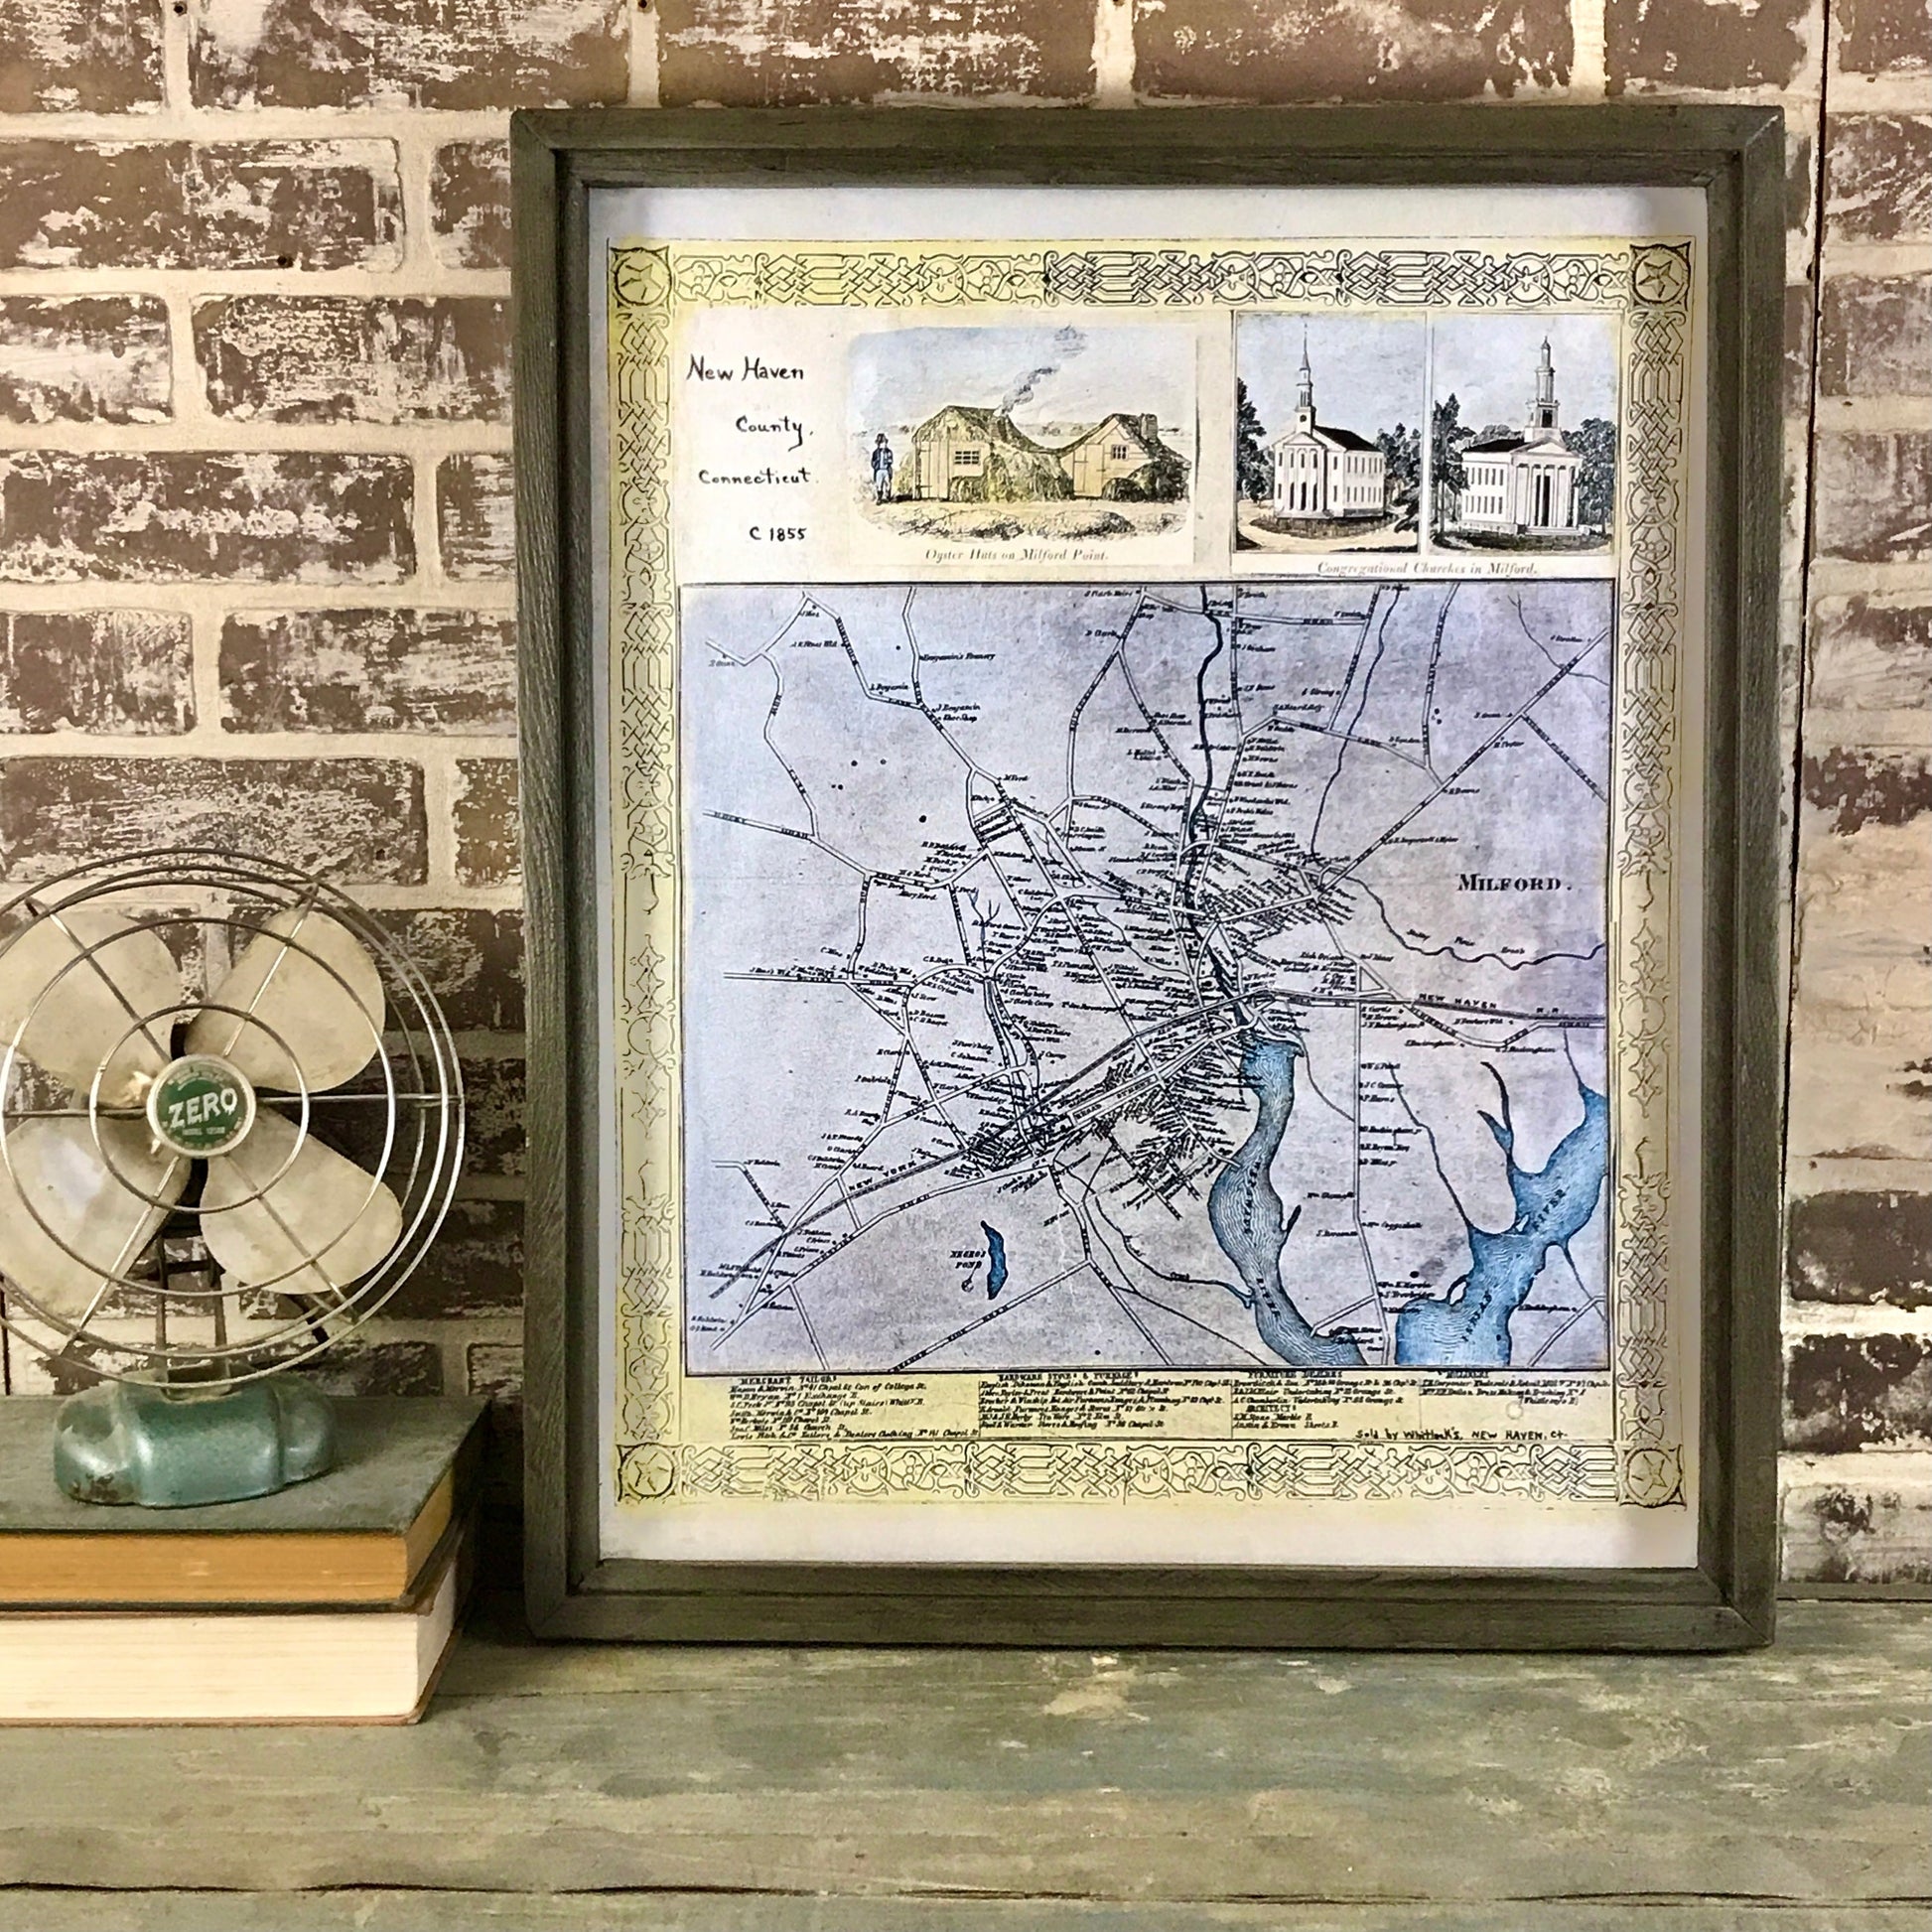 Town of Milford, Connecticut (New Haven County) Vintage Map 1855 - Reclaimed Wood Frame - Brown Wax - 26-3/4-in - Mellow Monkey